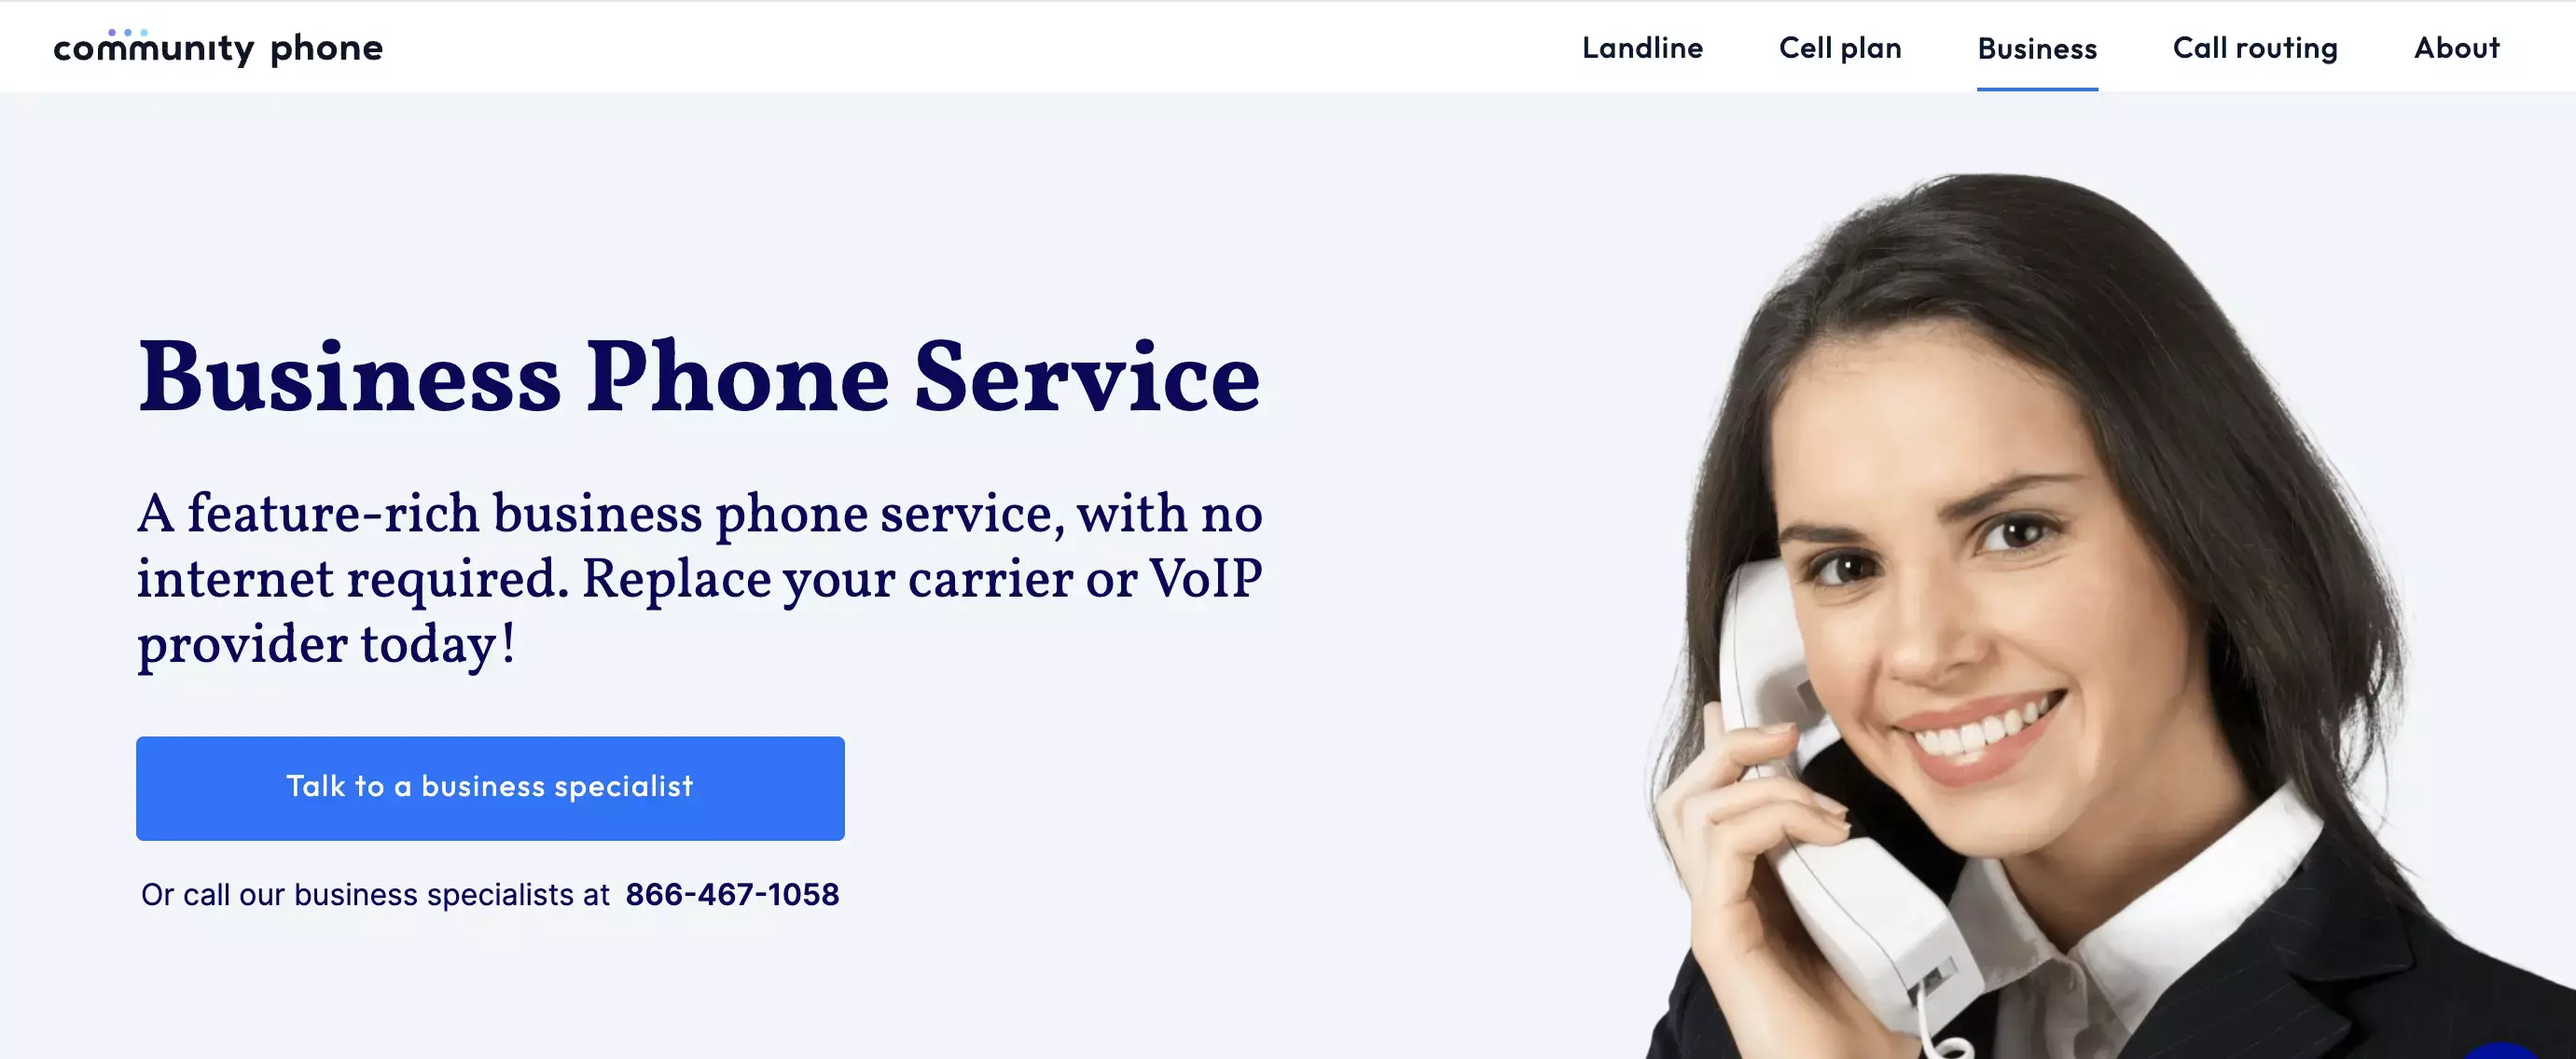 An image of Community Phone's landline service for business